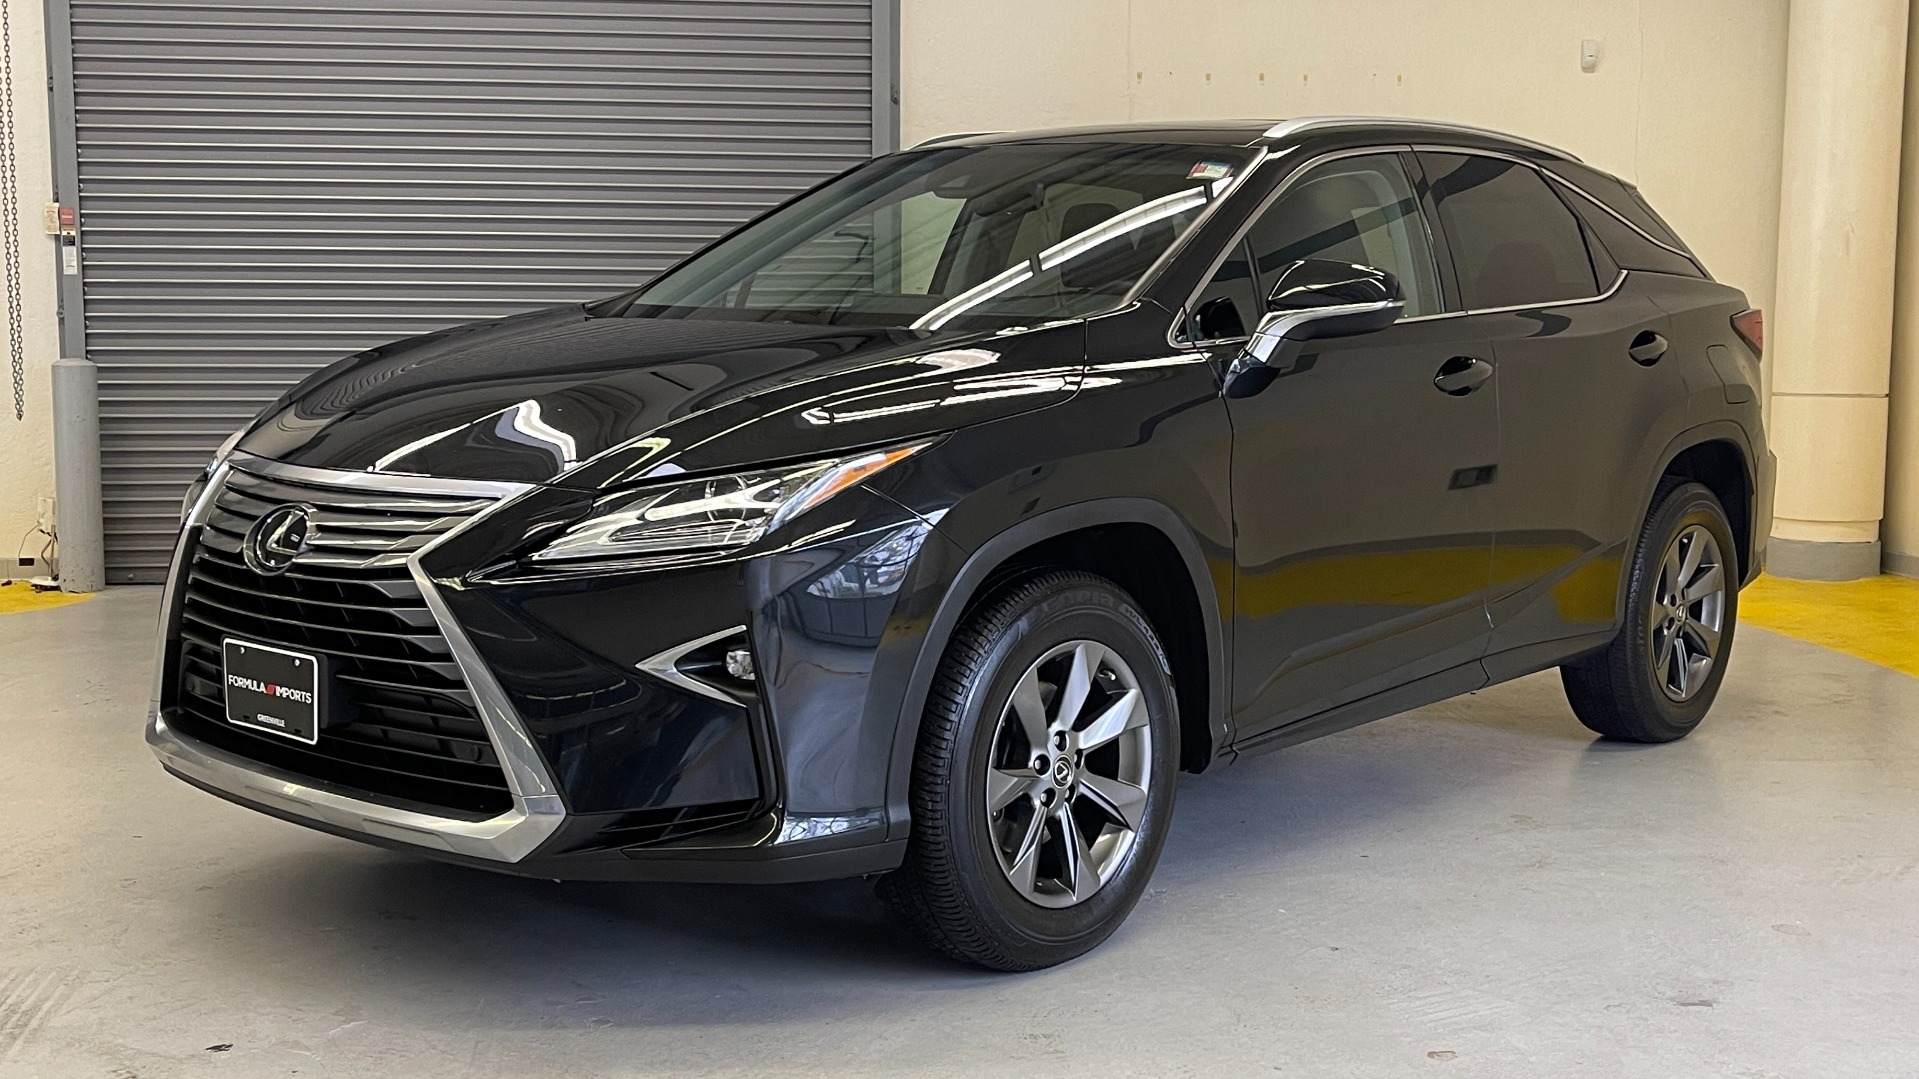 Used 2019 Lexus RX 350 AWD 3.5L SUV / PREMIUM / BSM / PARK ASST / VENT STS / SUNROO for sale $46,595 at Formula Imports in Charlotte NC 28227 1